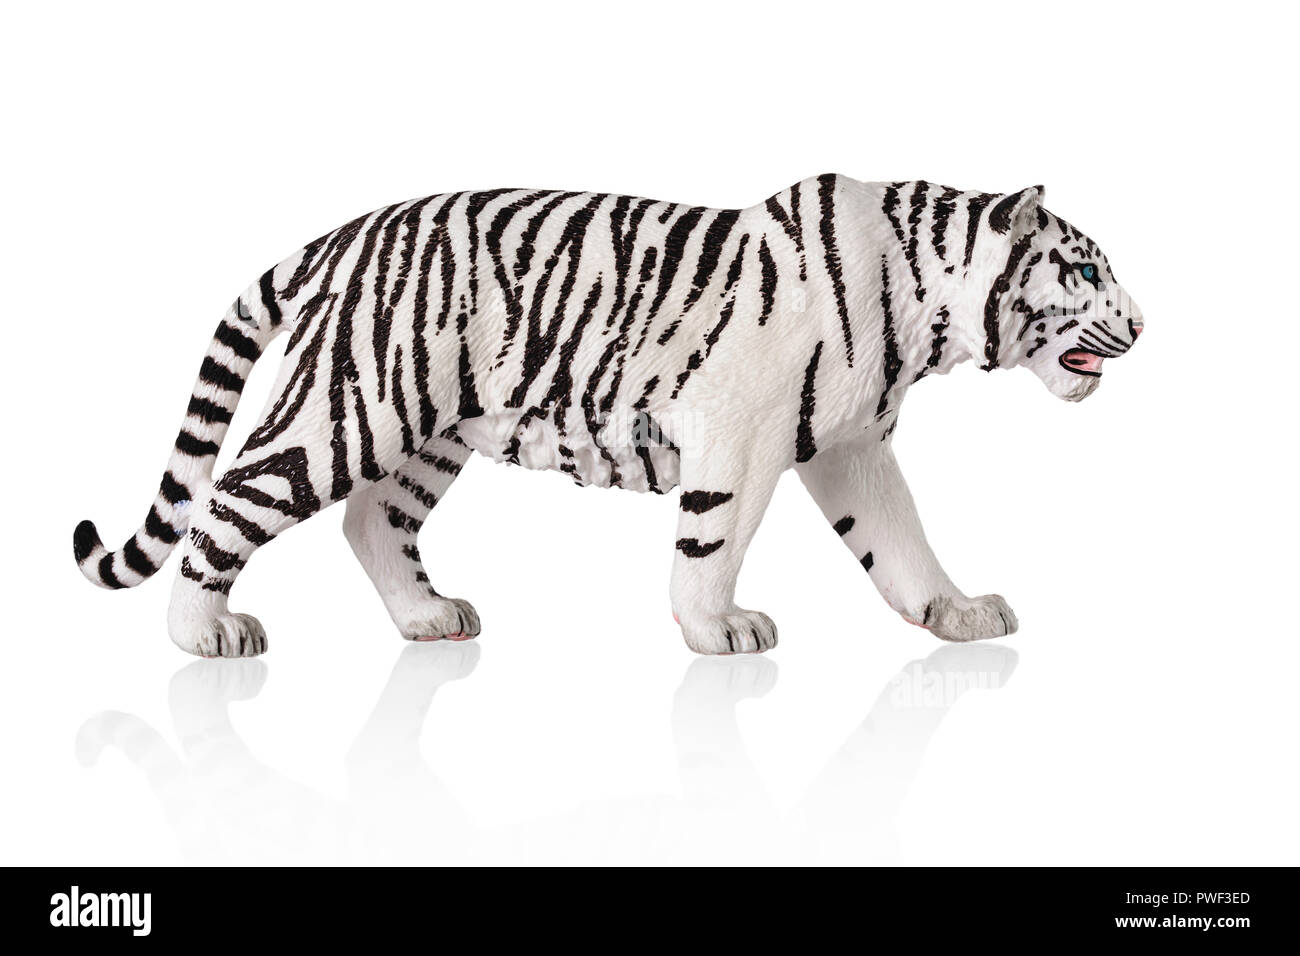 White bengal tiger toy. Isolated over white background. Stock Photo